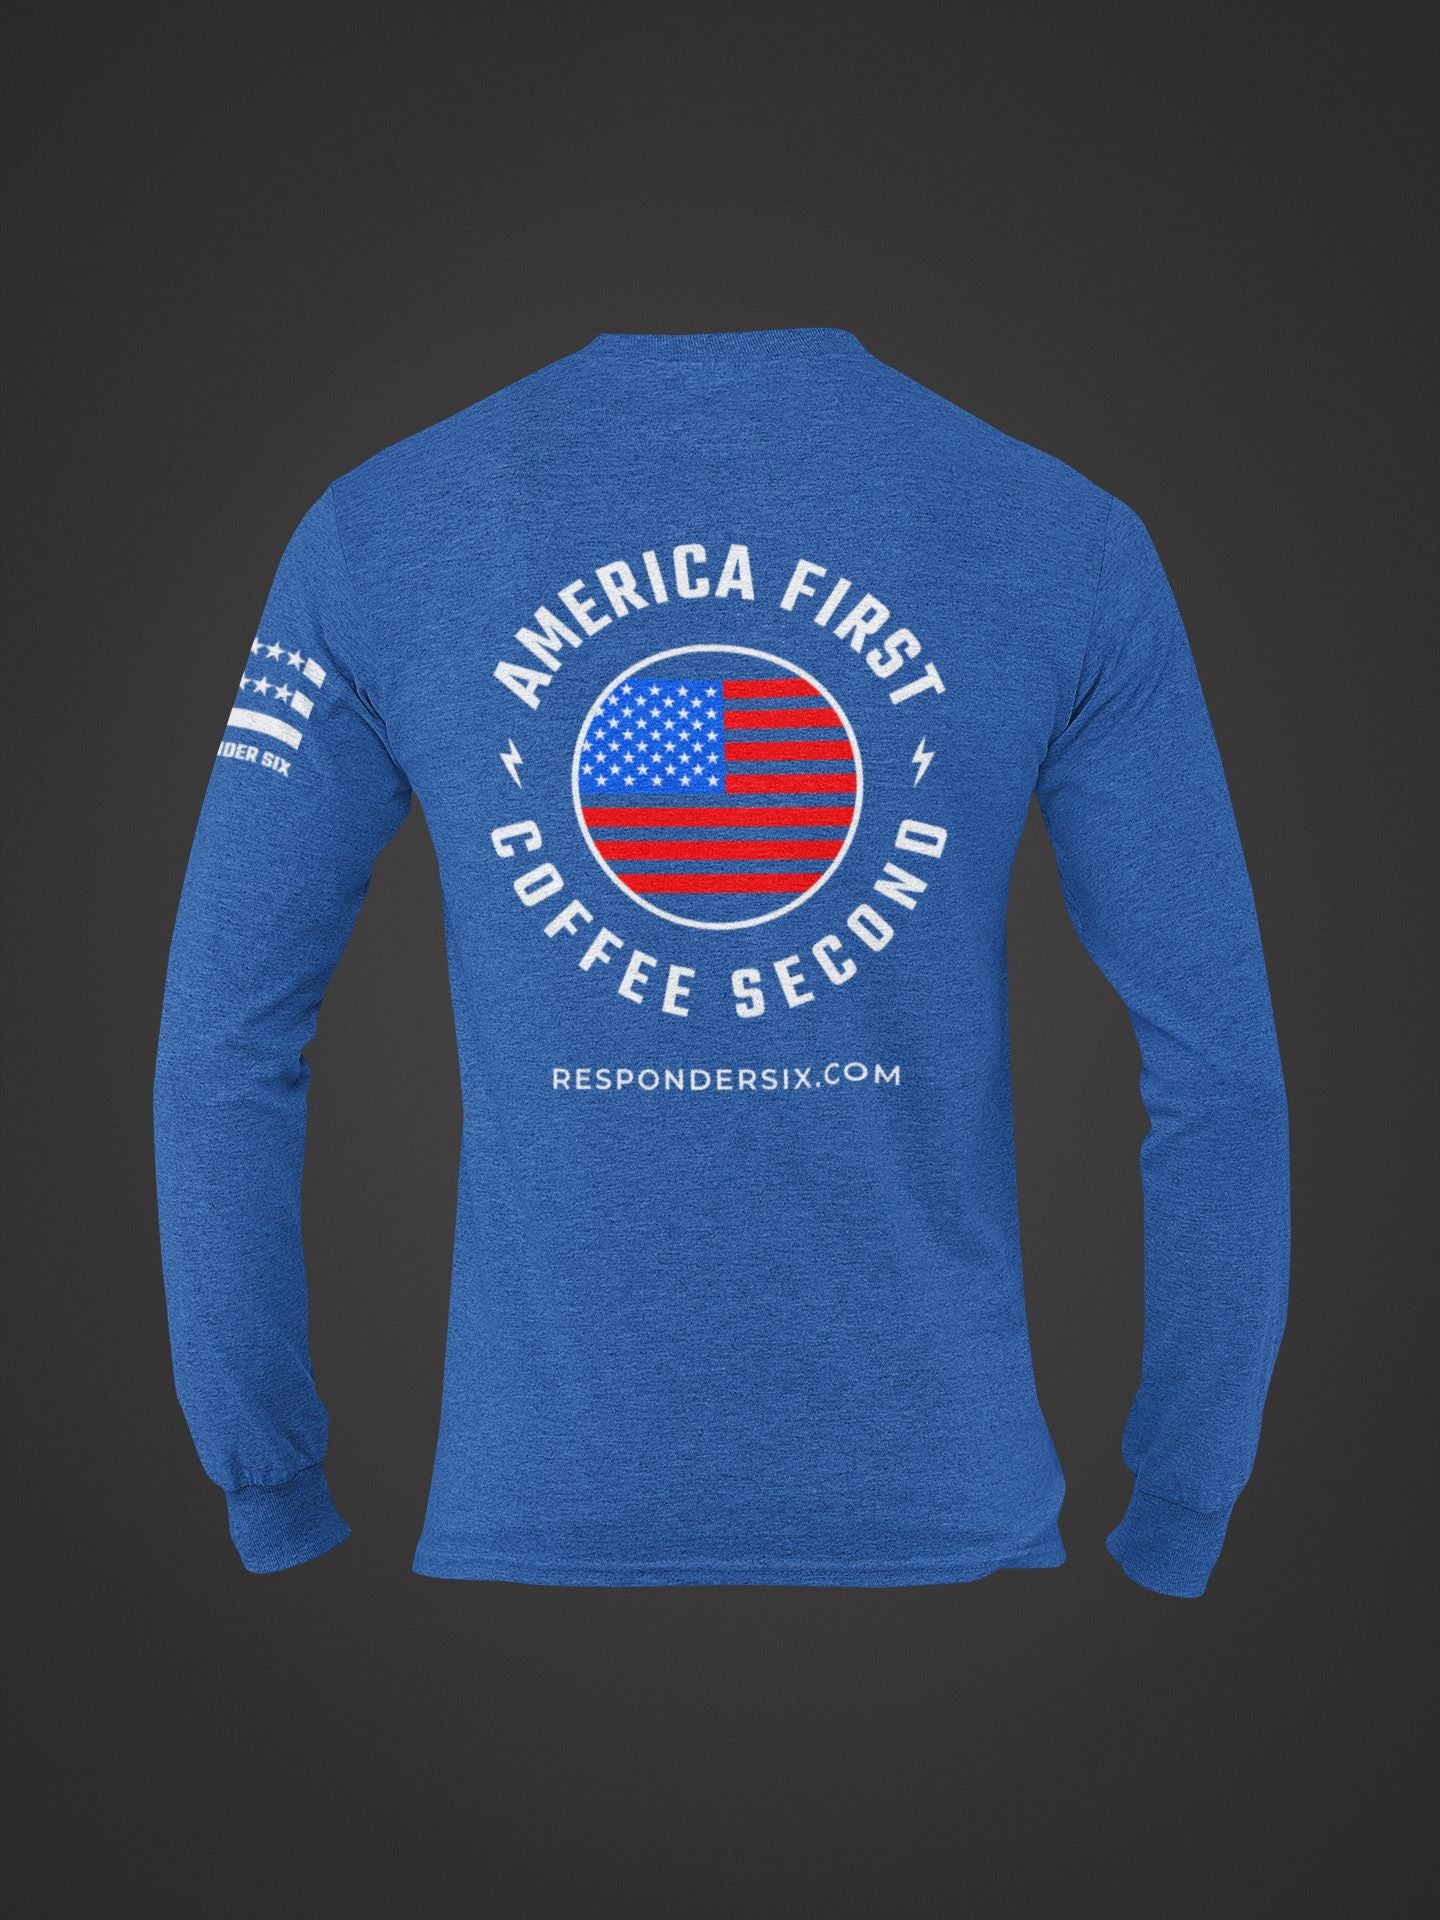 America First Coffee Second Long Sleeve